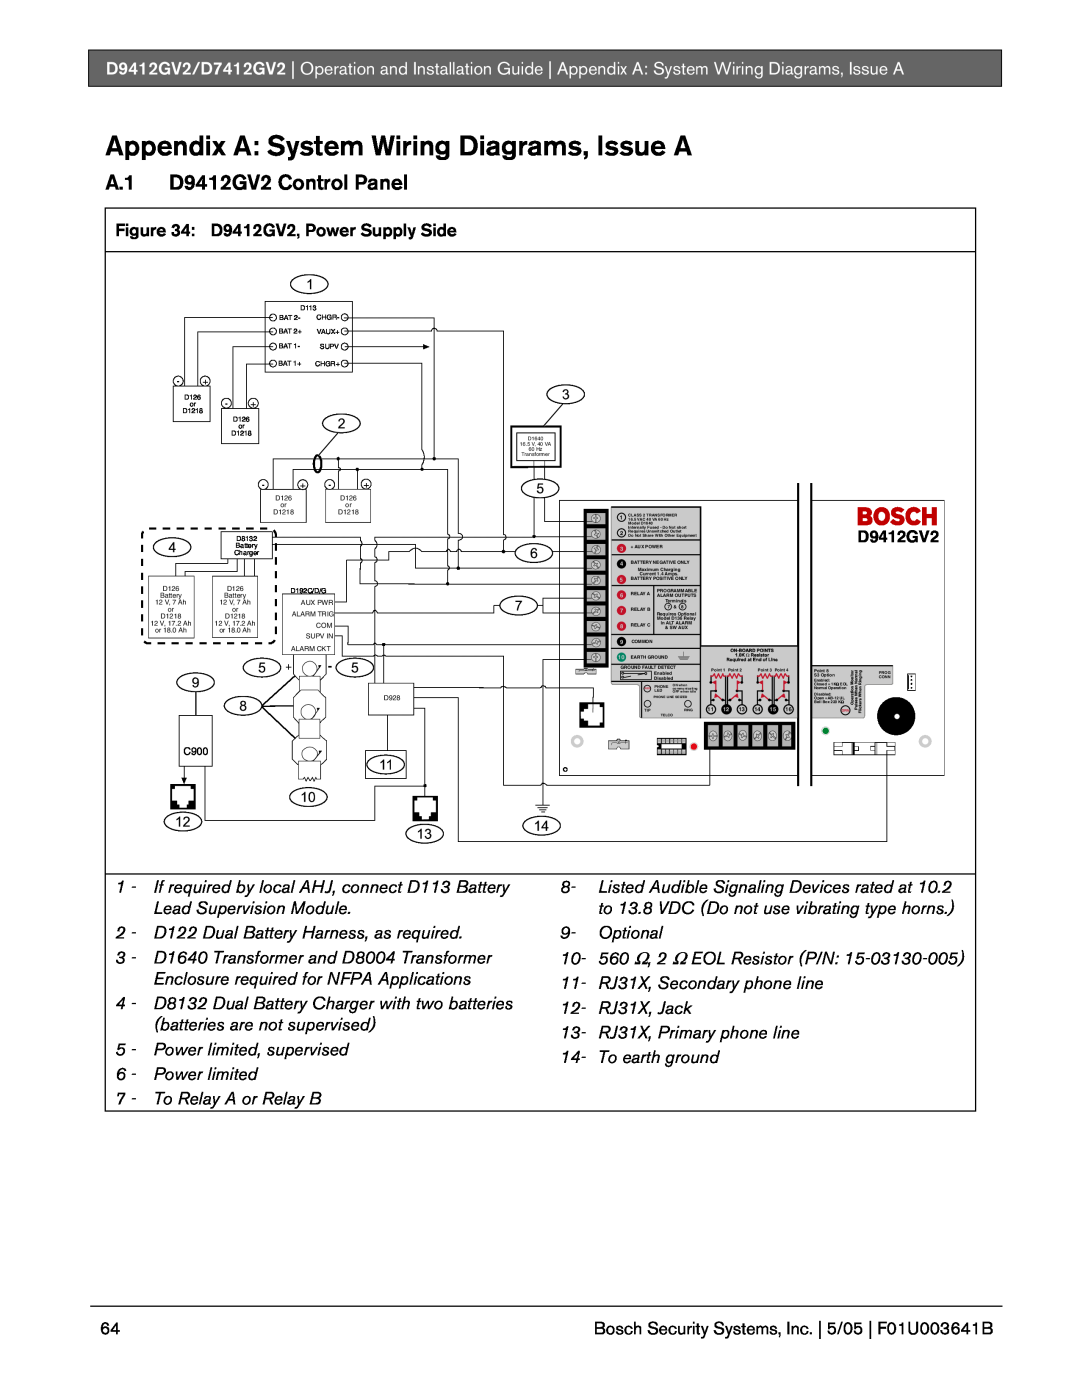 Bosch Appliances manual Appendix A: System Wiring Diagrams, Issue A, A.1 D9412GV2 Control Panel 